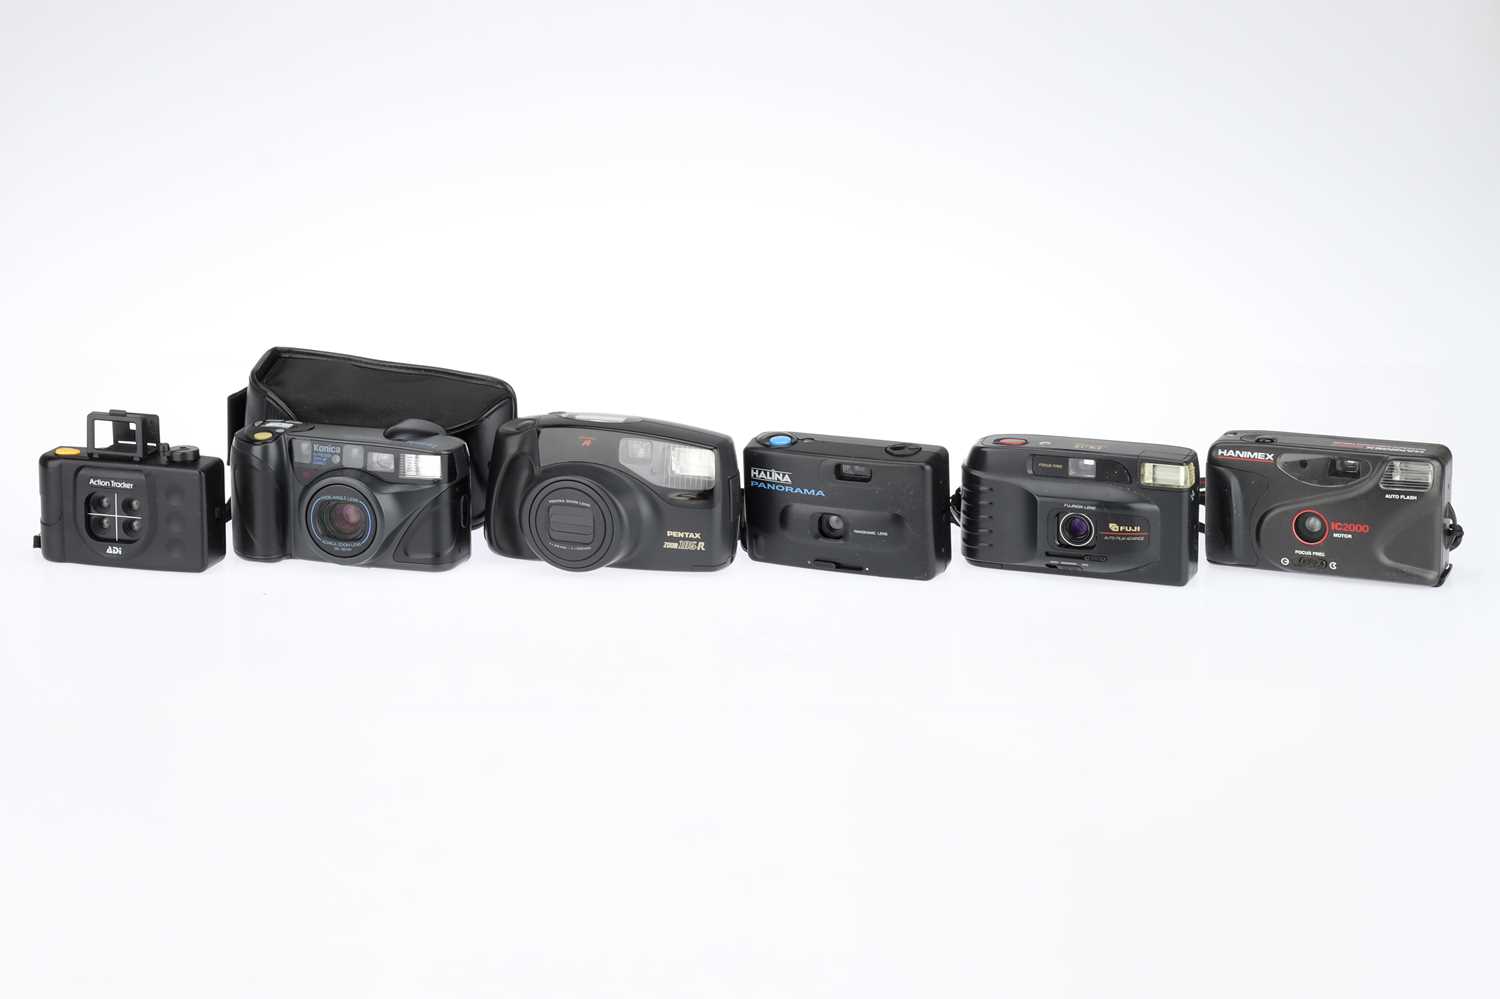 Lot 106 - A Selection of 35mm Compact Cameras